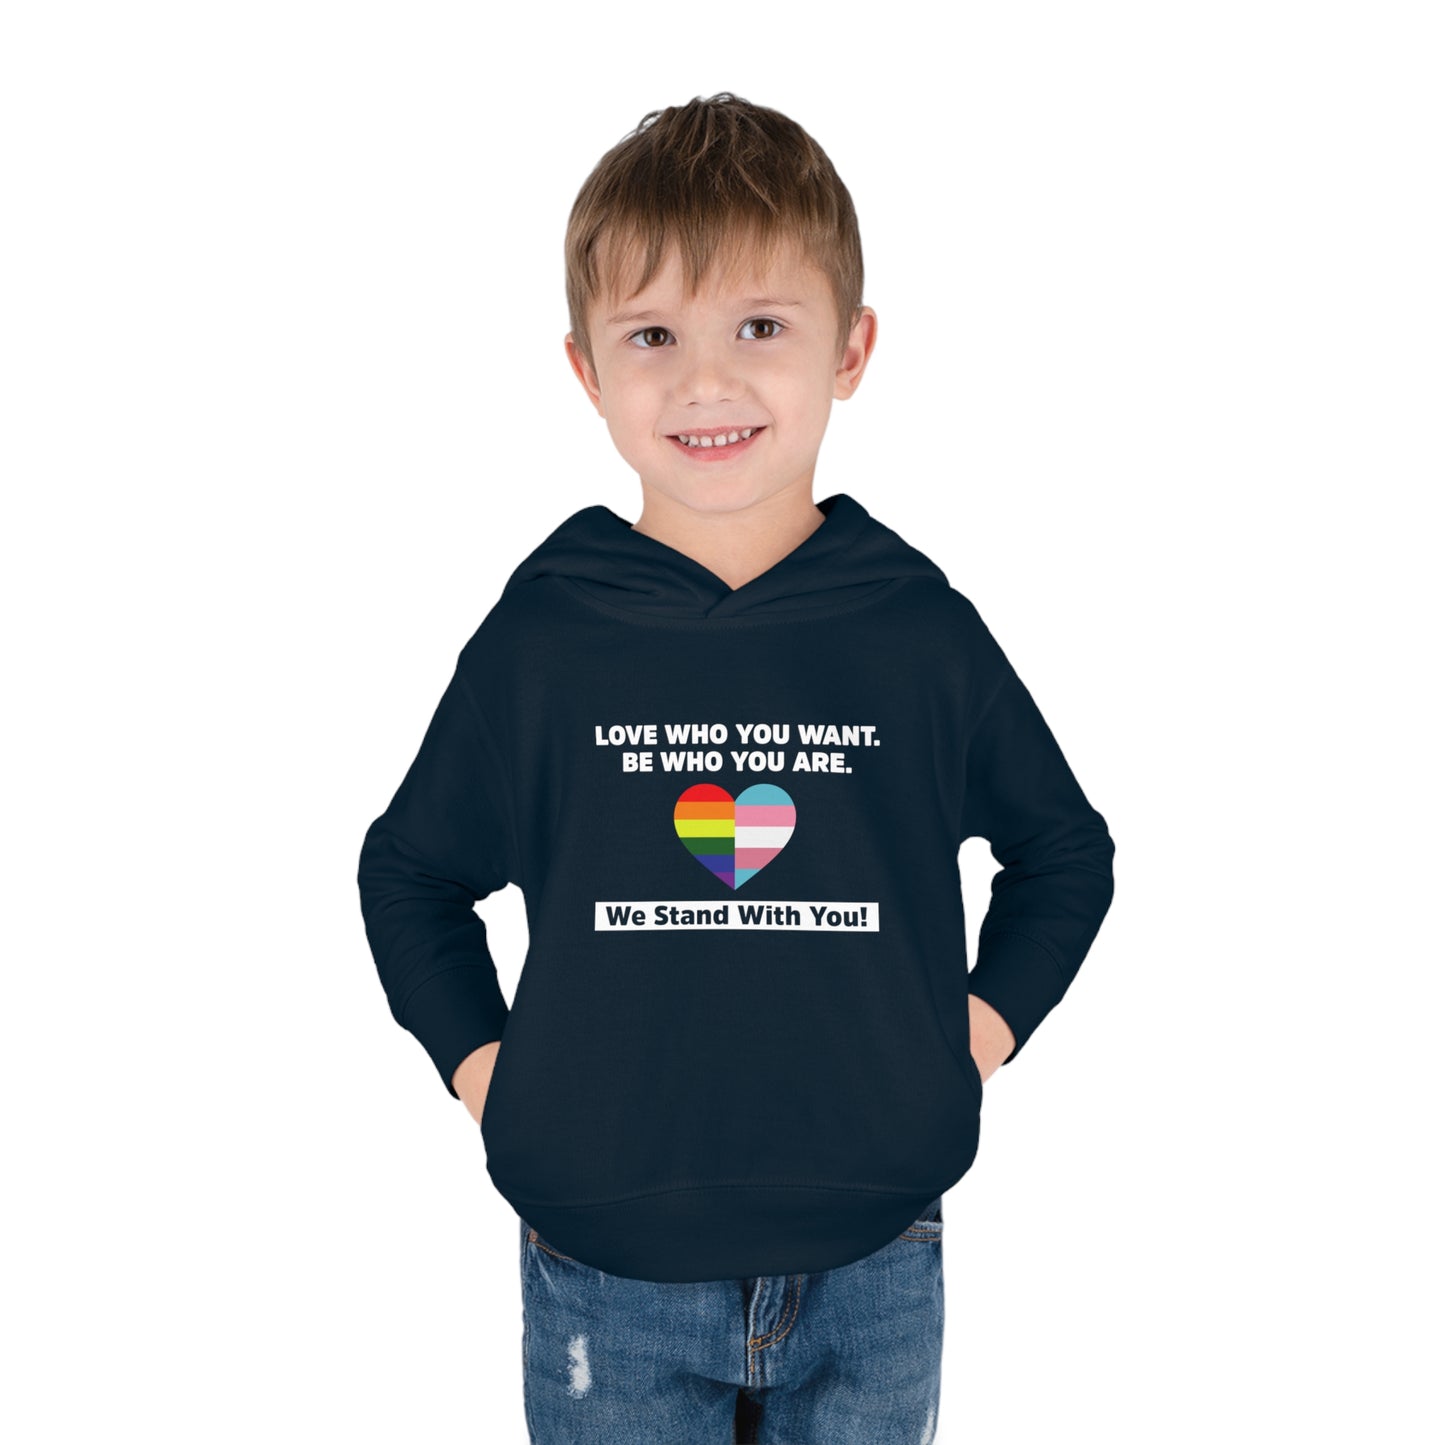 "Love Who You Want" Toddler Hoodie